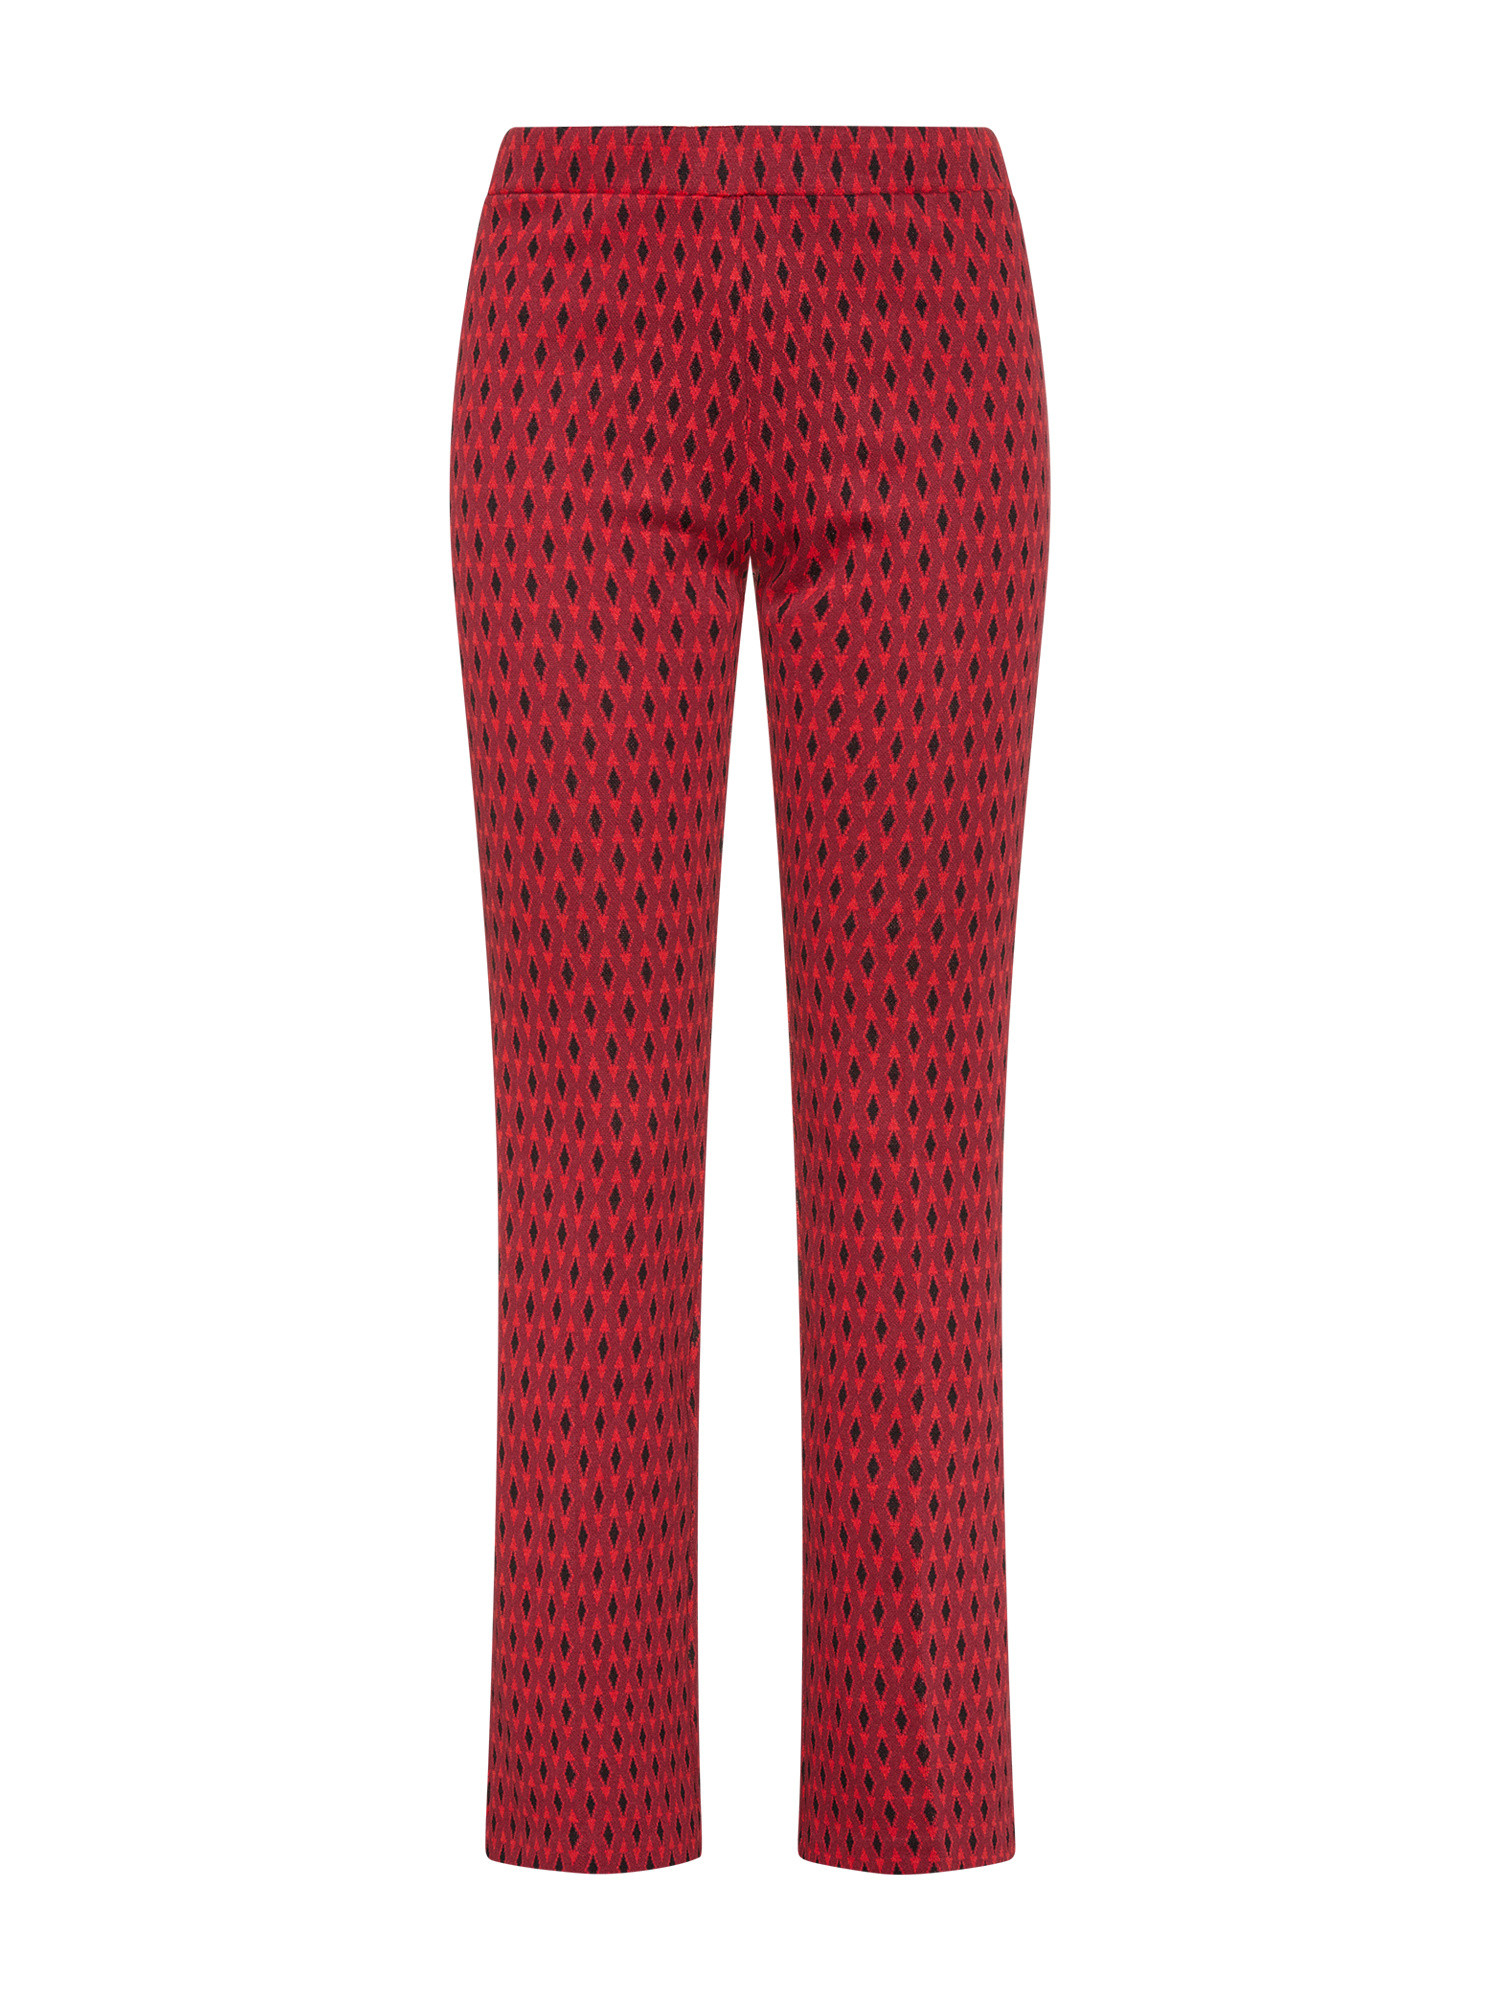 Koan - Flare trousers with diamond pattern, Red, large image number 0